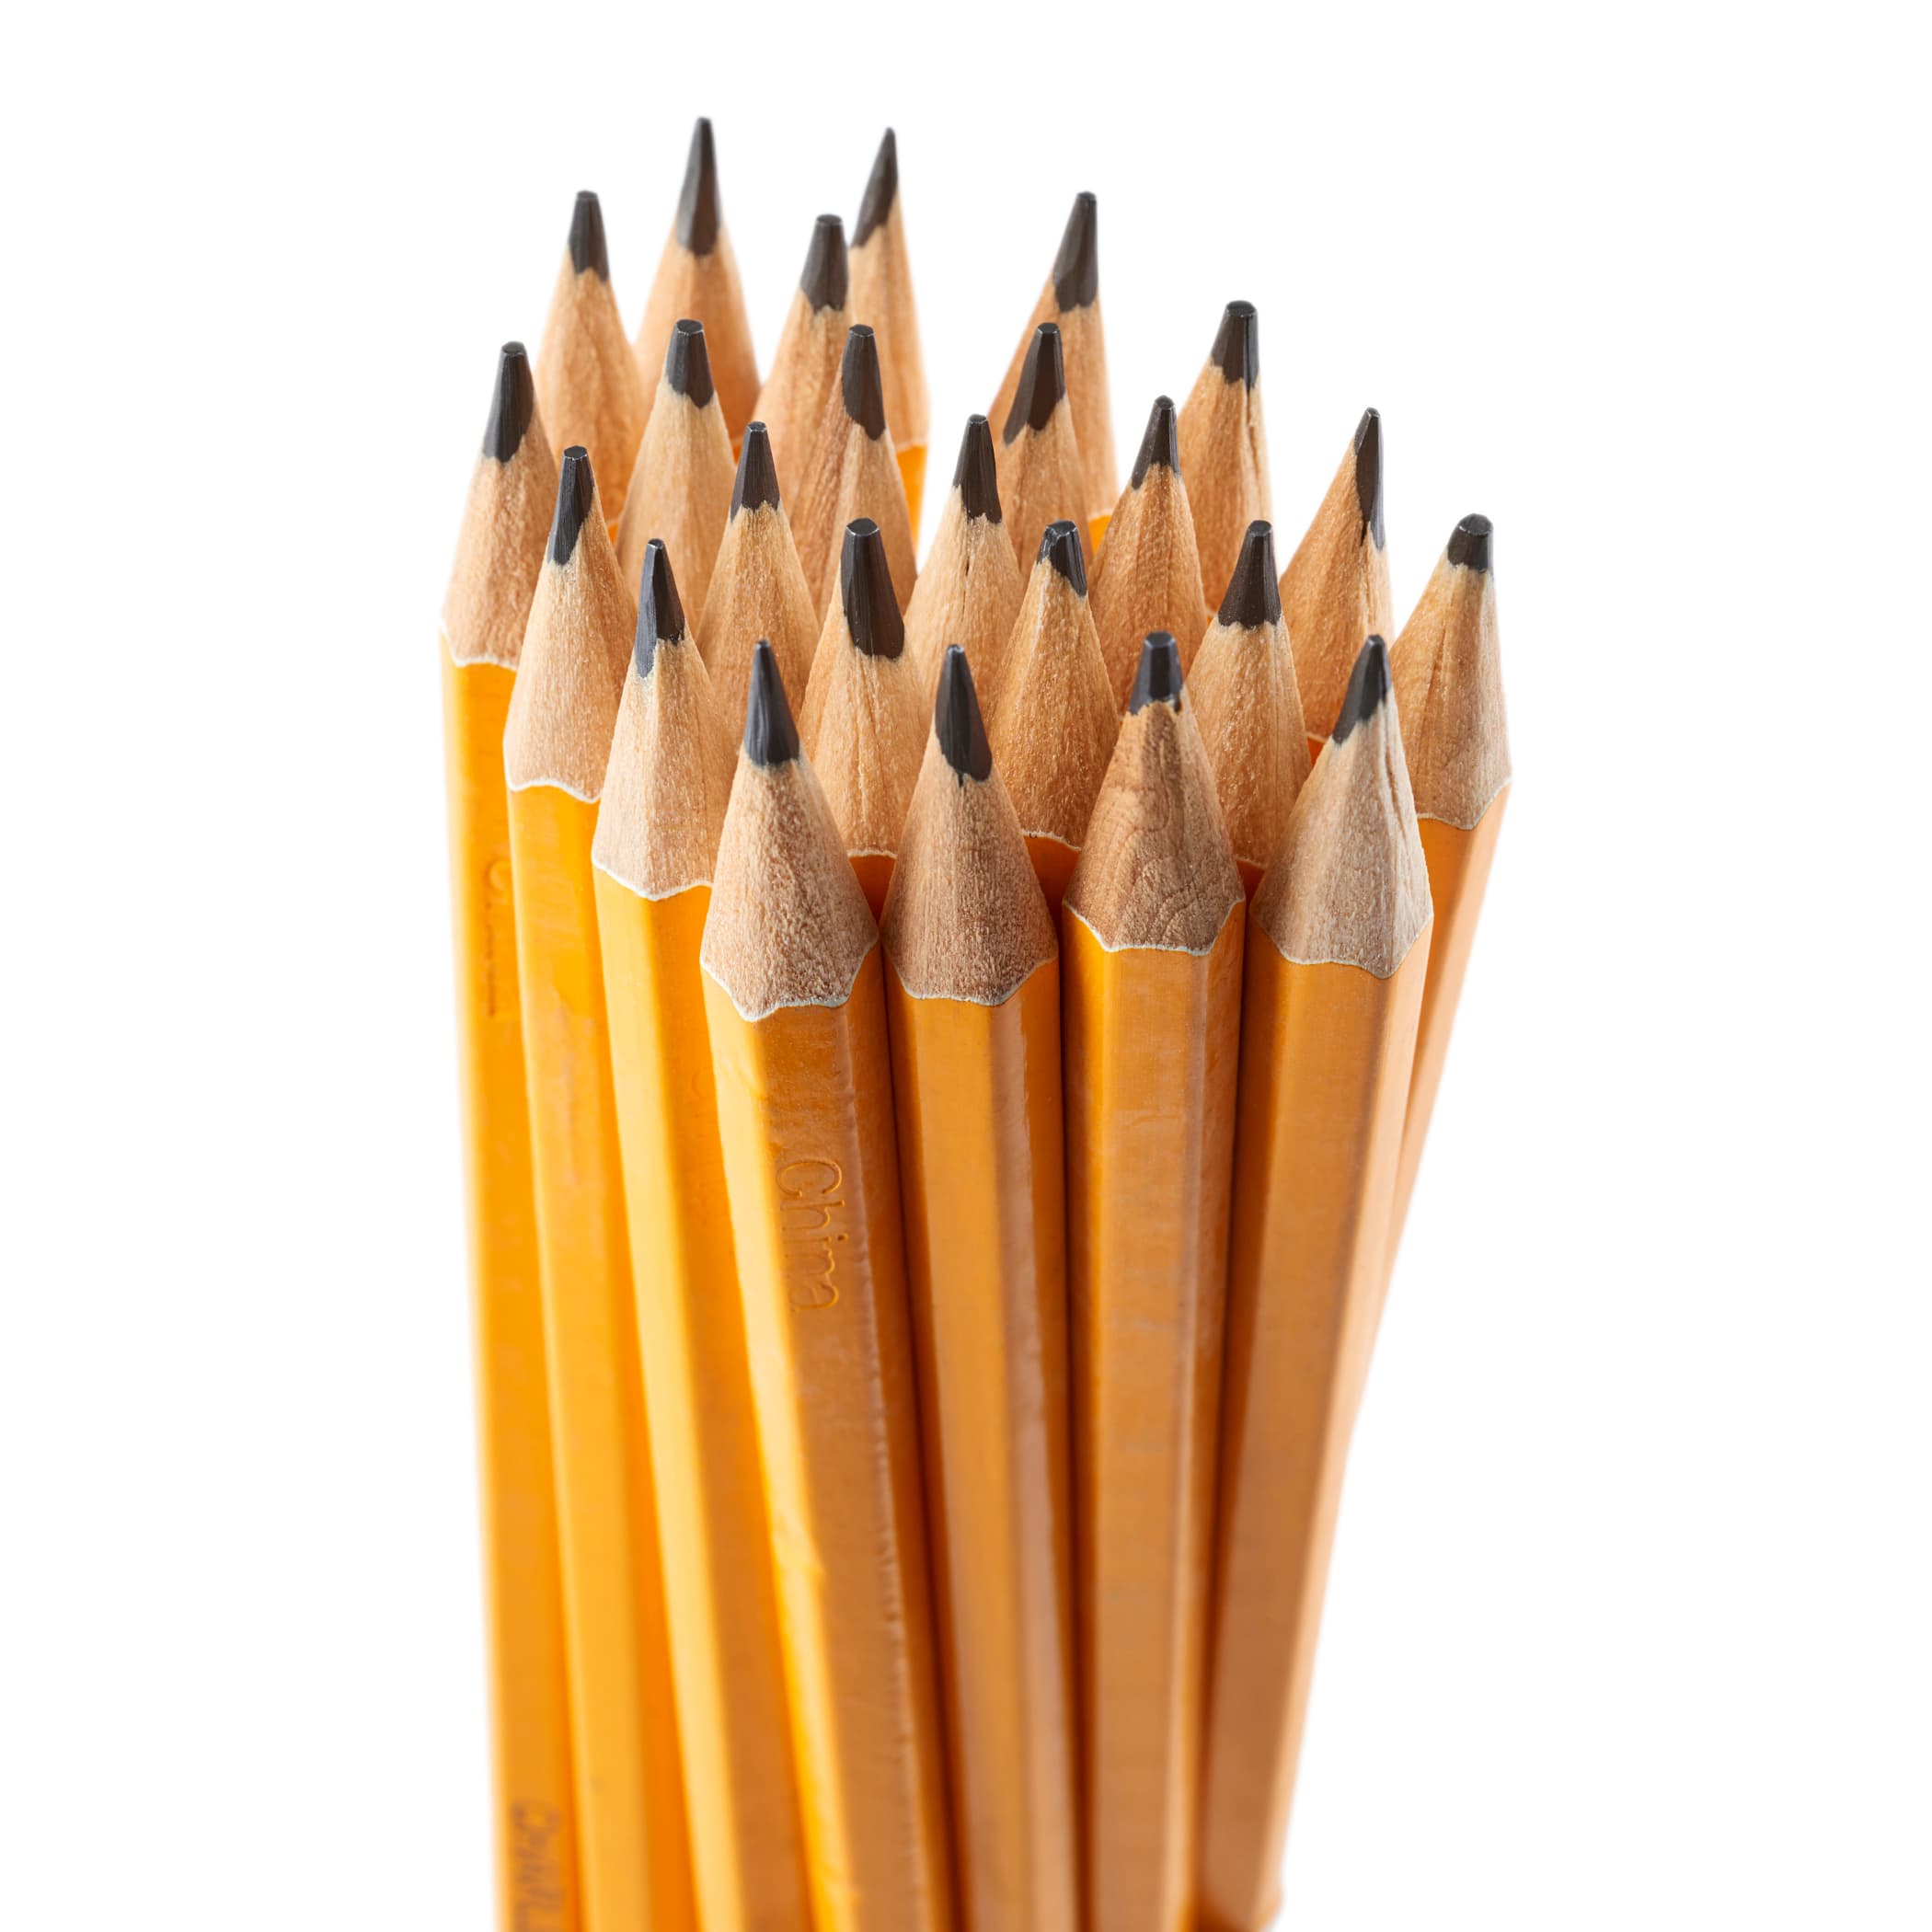 5 Packs: 12 Packs 12 ct. (720 total) Charles Leonard Pre-Sharpened Yellow No. 2 Pencil with Eraser